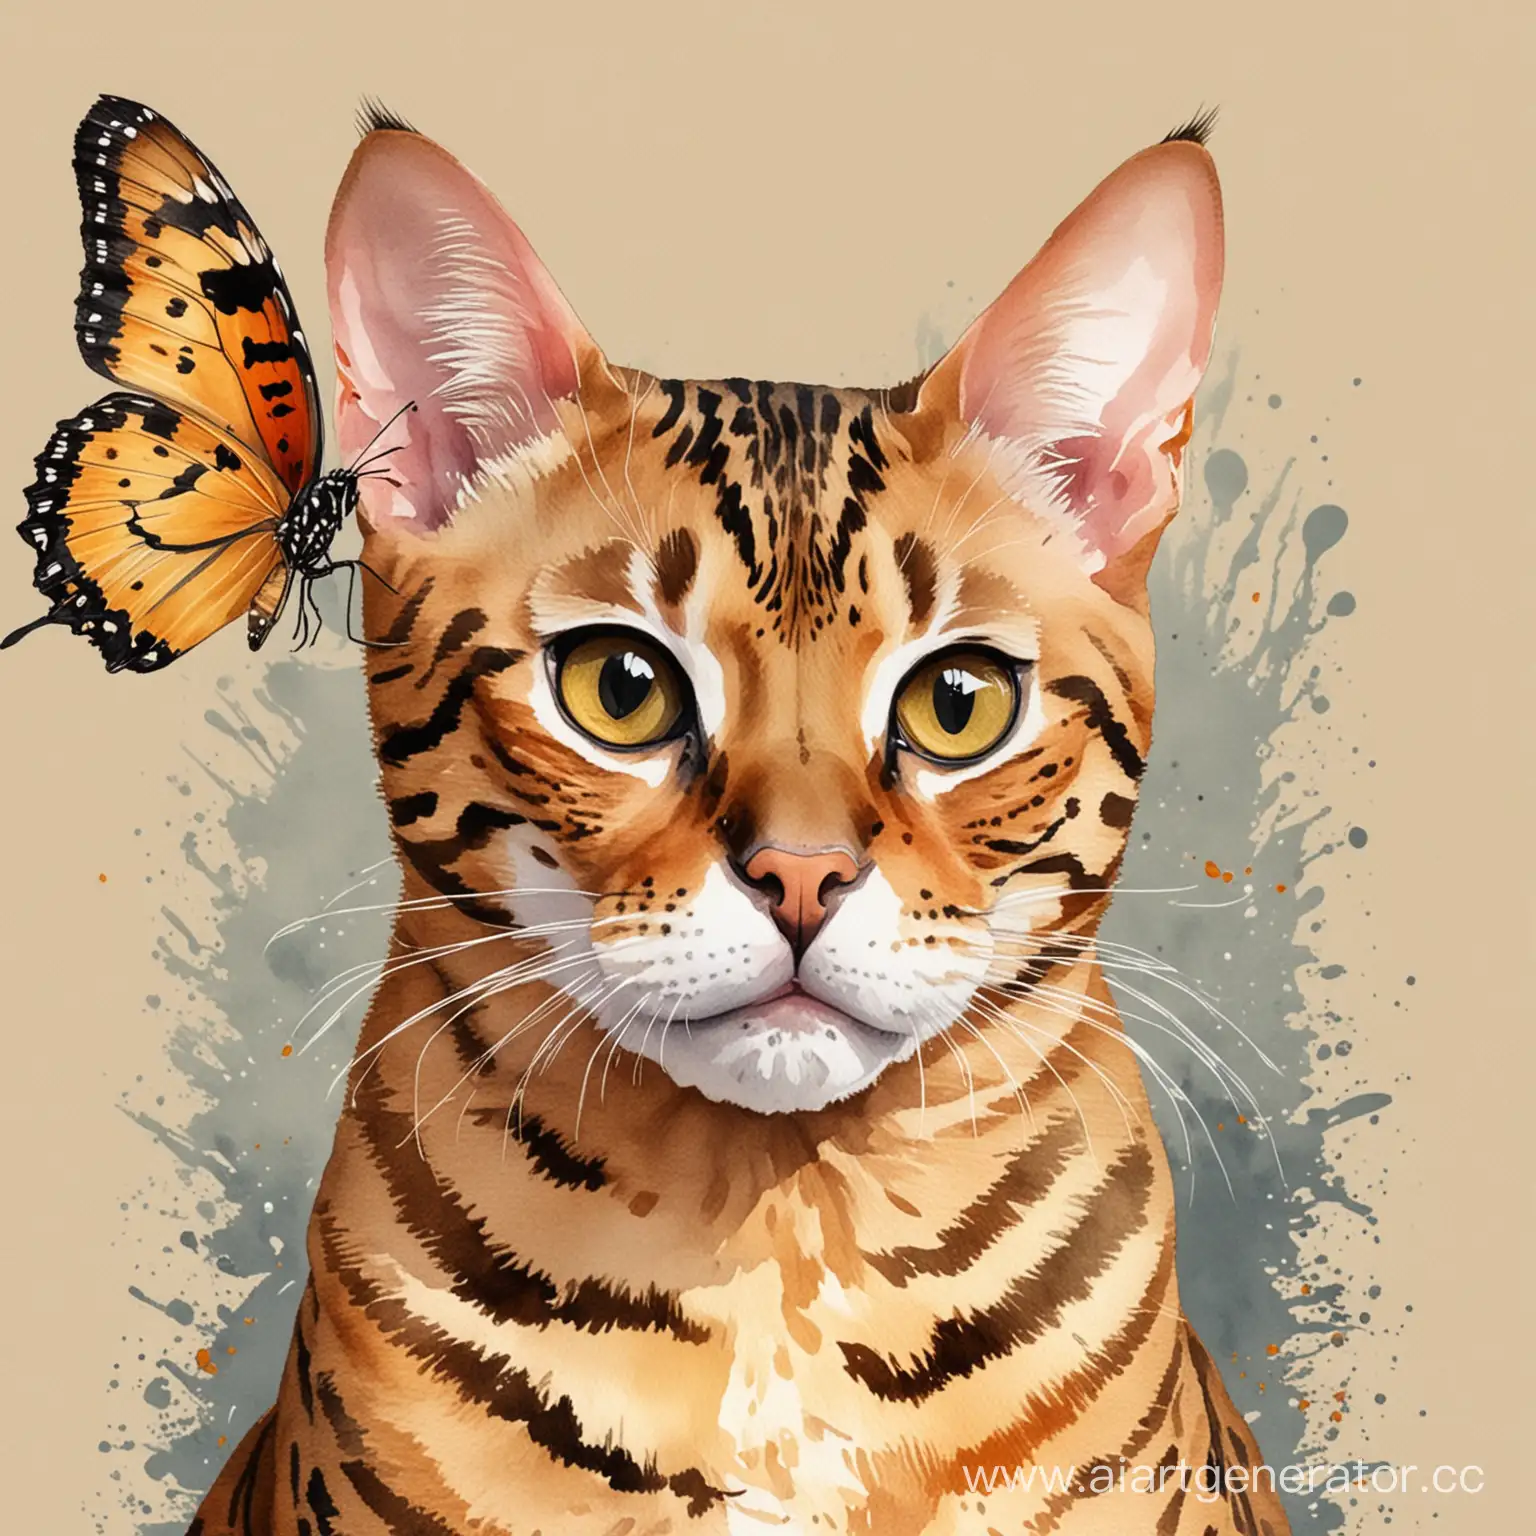 Playful-Bengal-Cat-in-a-Whimsical-Watercolor-and-Digital-Art-Landscape-with-Butterflies